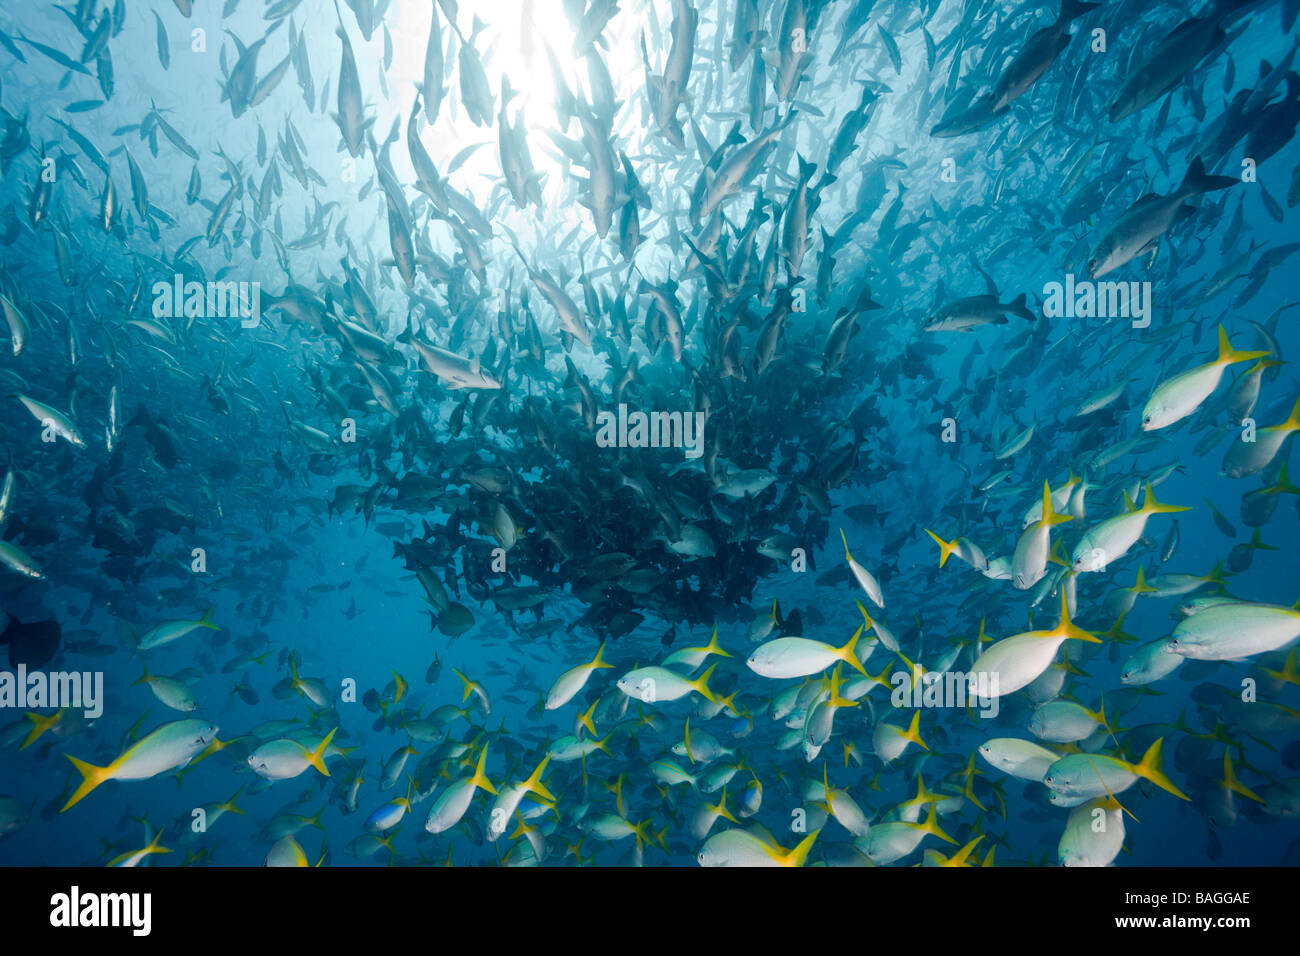 Shoal of Robust Fusilier and Rudderfish Caesio cuning Kyphosus cinerascens German Channel Micronesia Palau Stock Photo